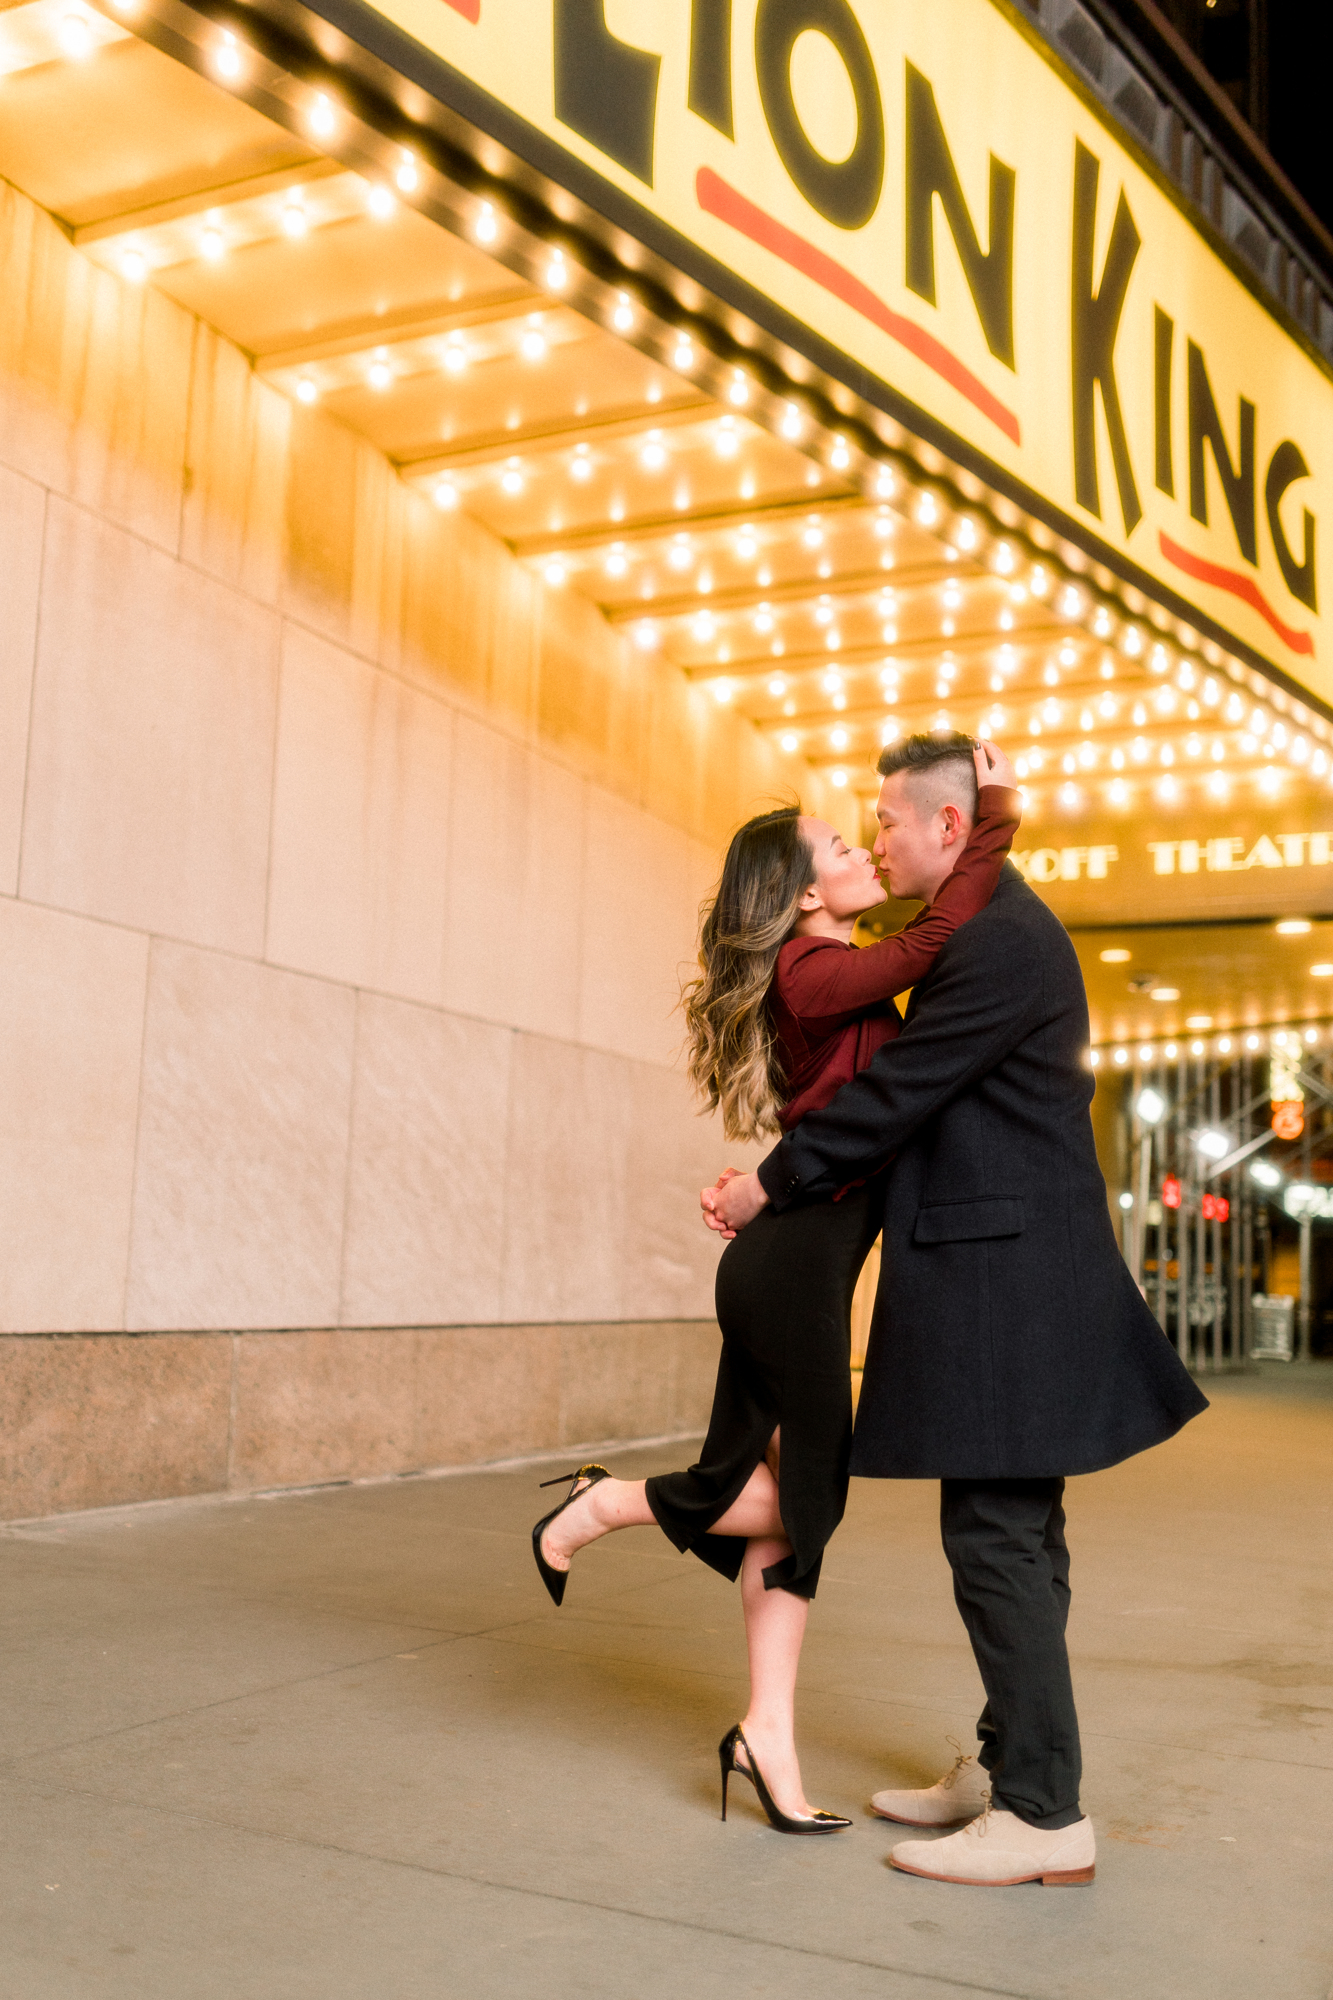 Stylish Nighttime Winter Engagement Photos in New York's Iconic Times Square